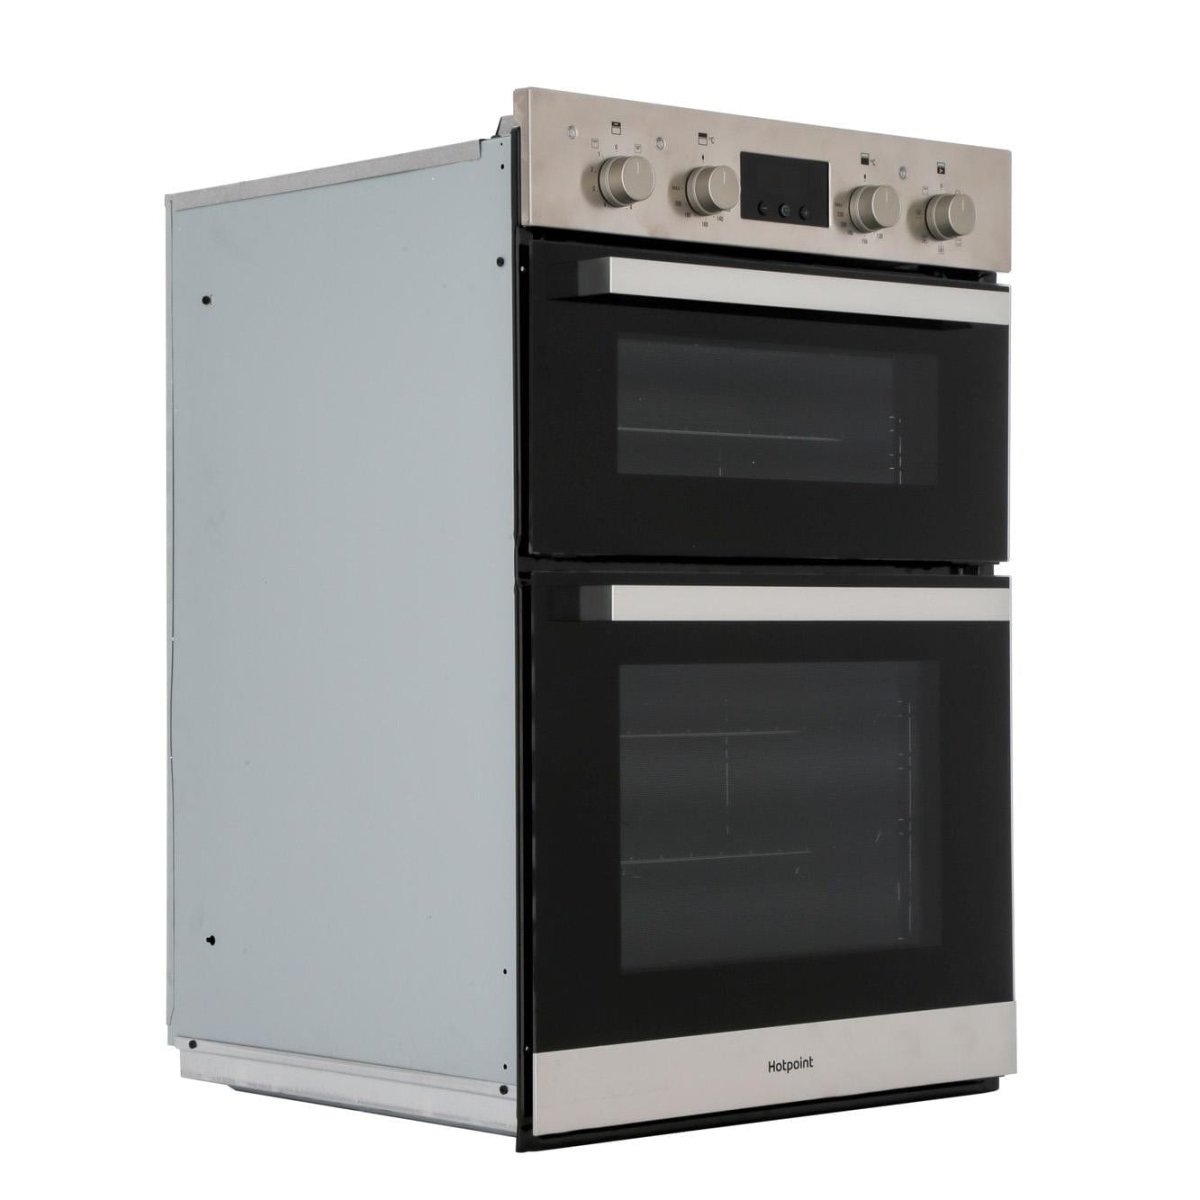 Hotpoint DKD3841IX Multifunction Electric Built In Double Oven - Stainless Steel - Atlantic Electrics